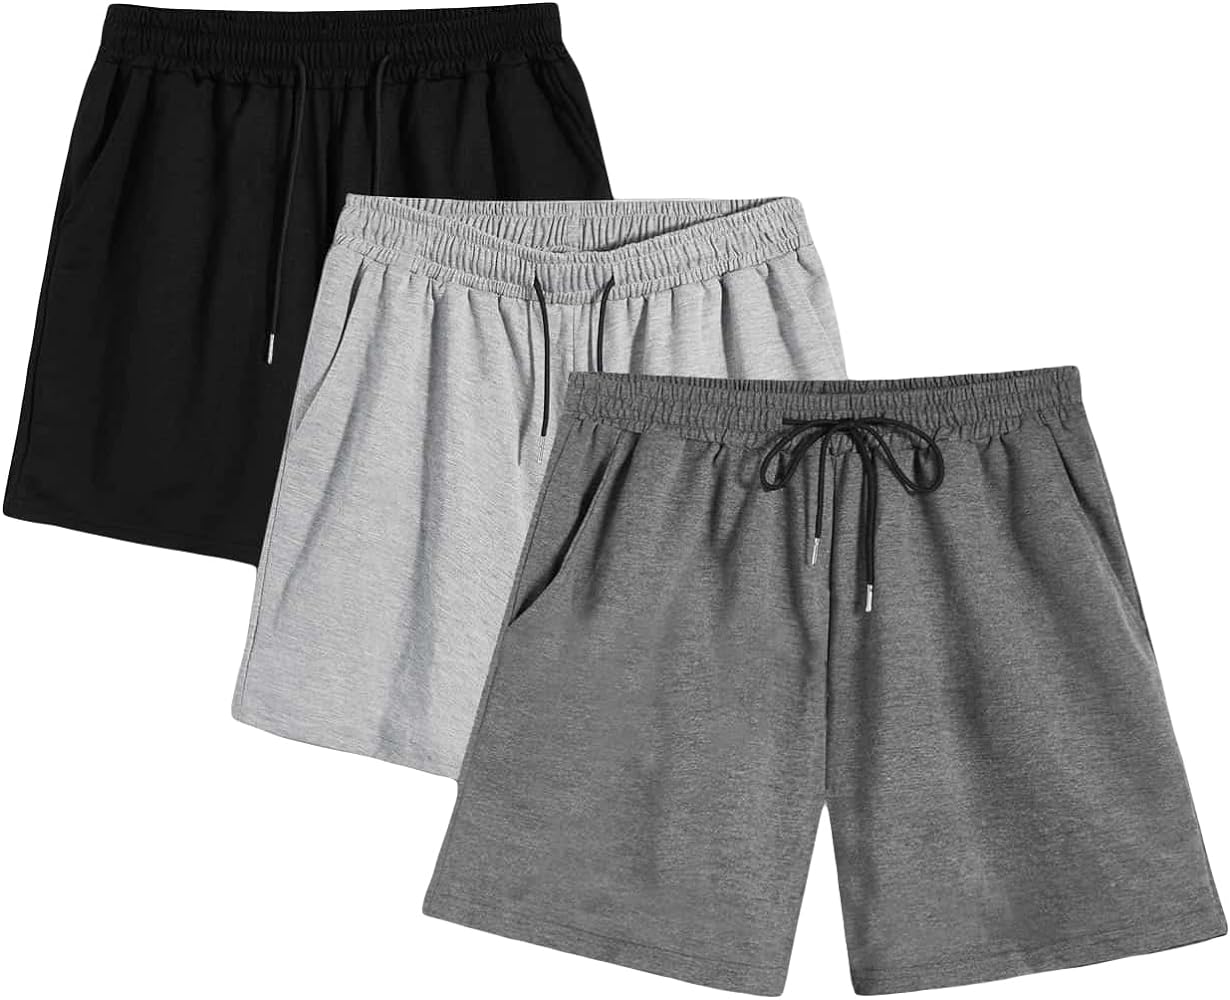 12 Best Cotton Gym Shorts For Men With Pockets For 2023